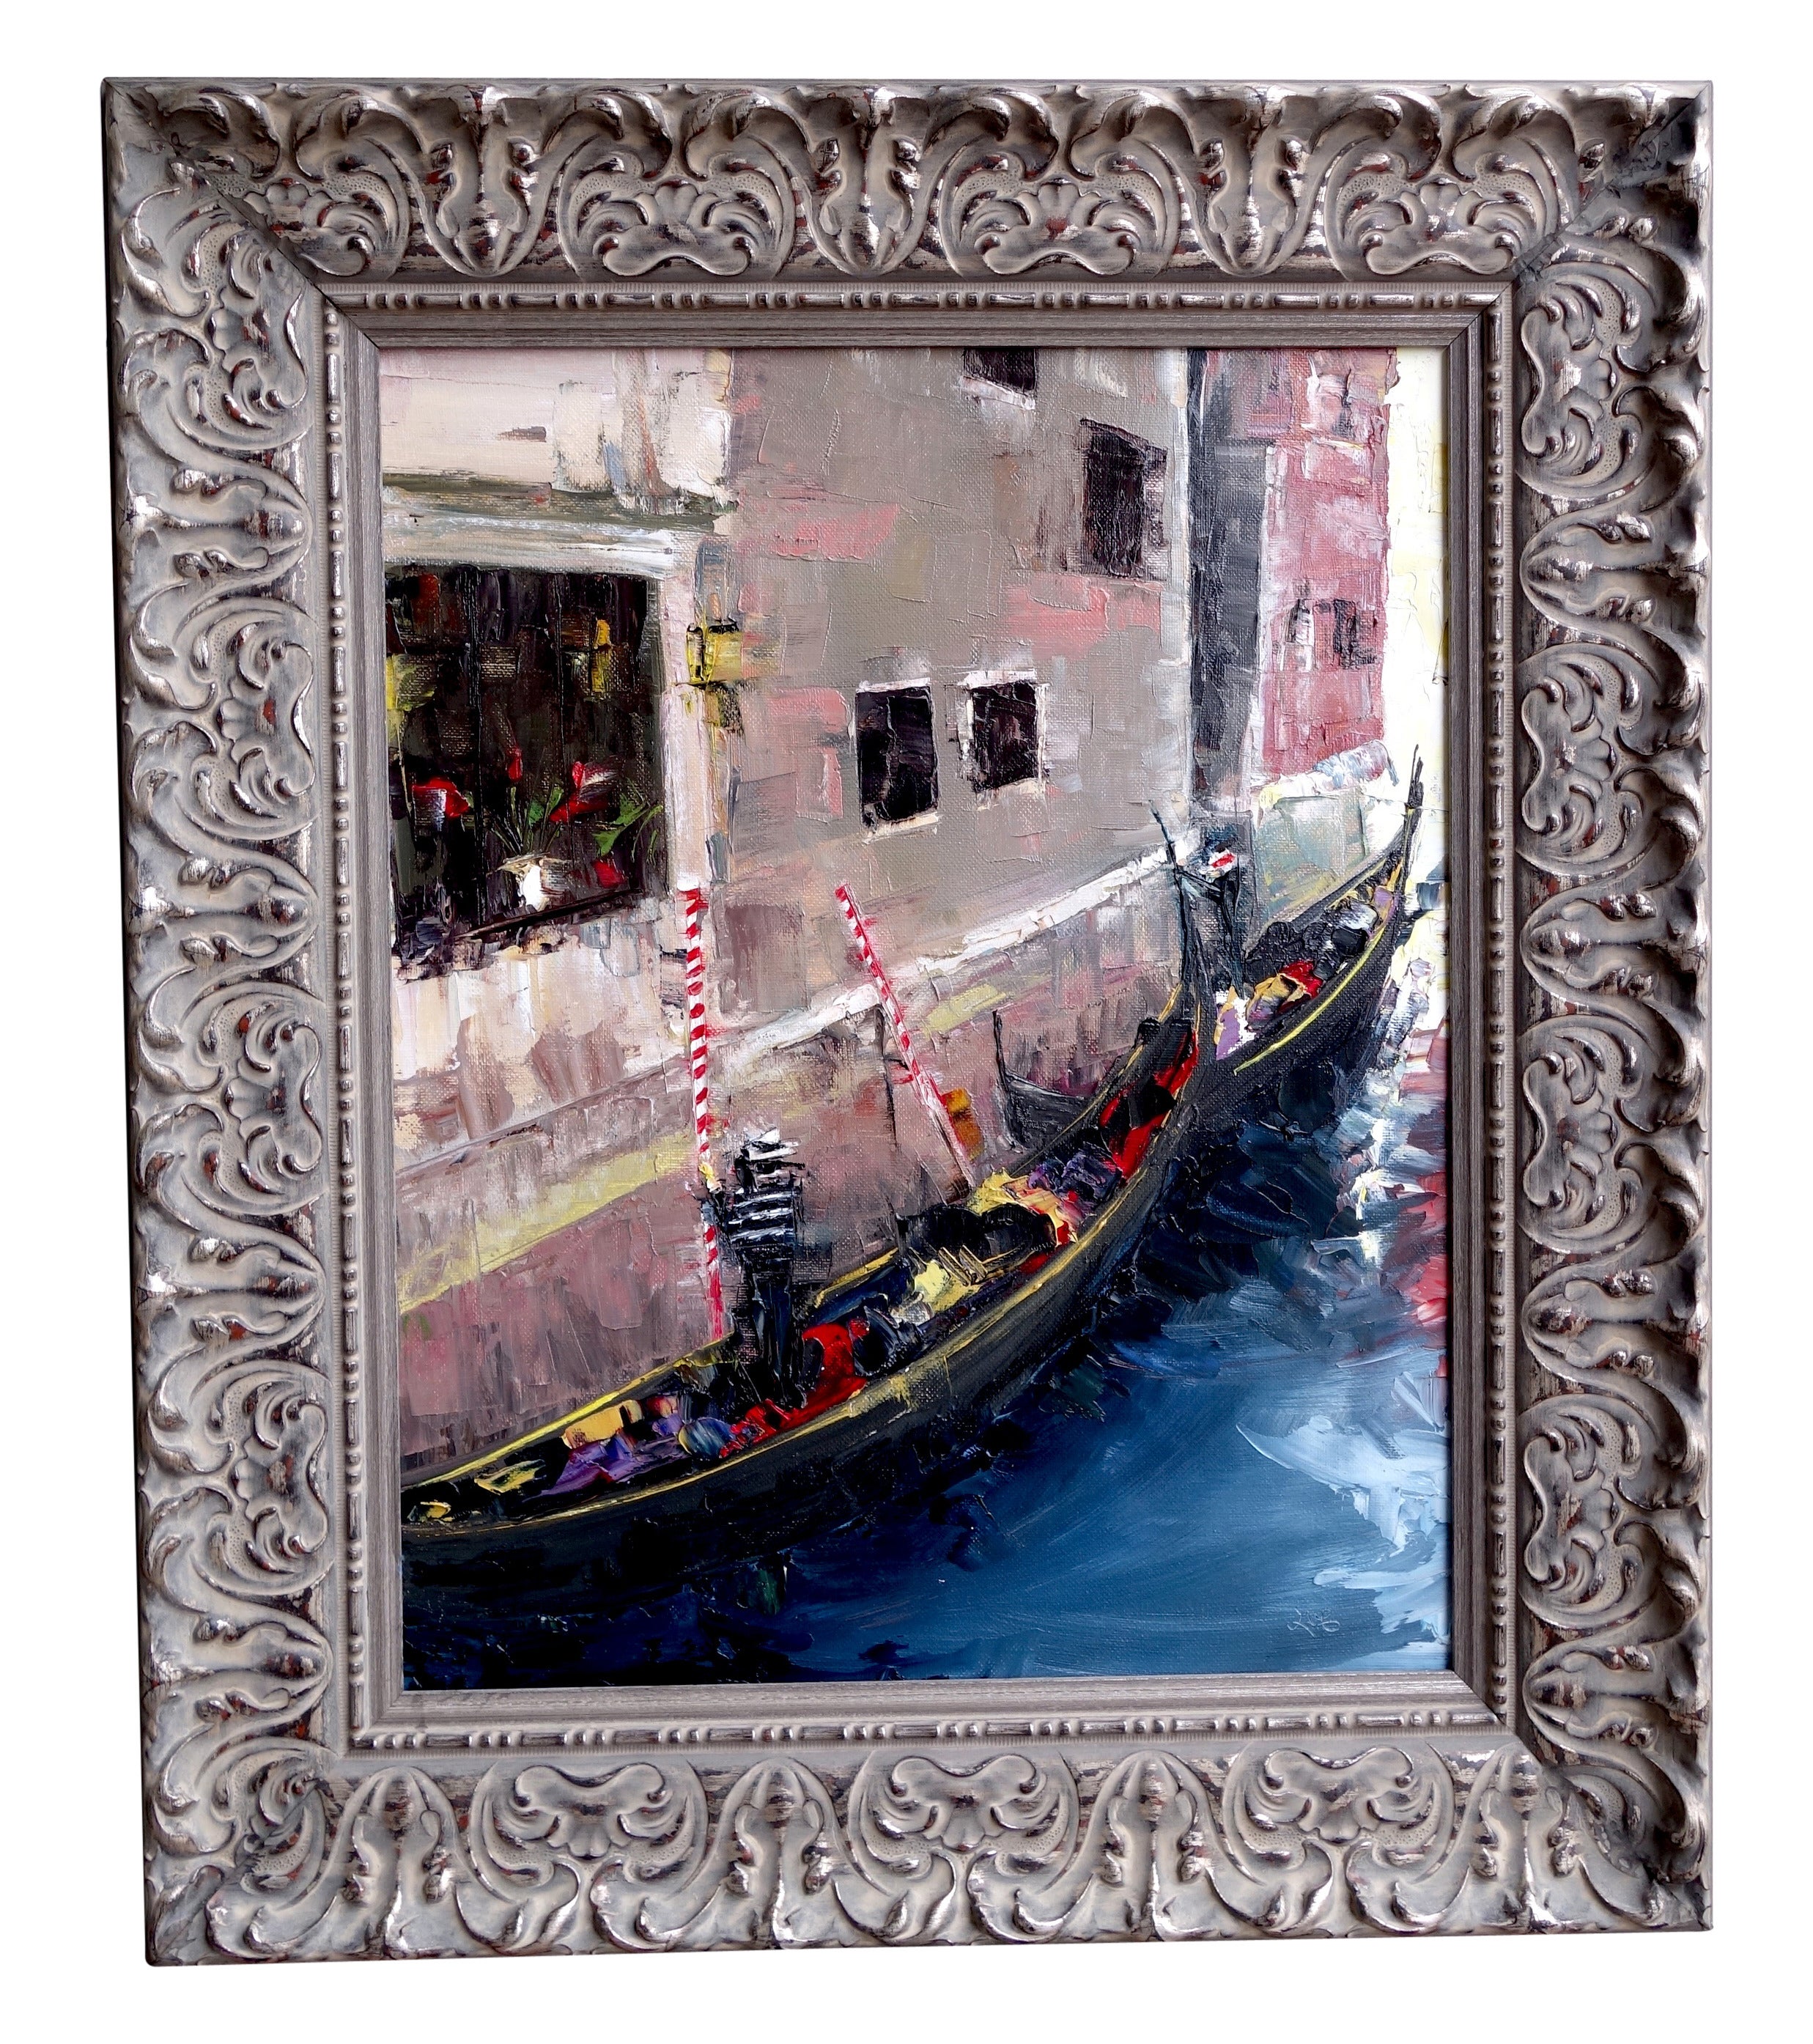 "One Time in Venice" by Leigh Ann Van Fossan